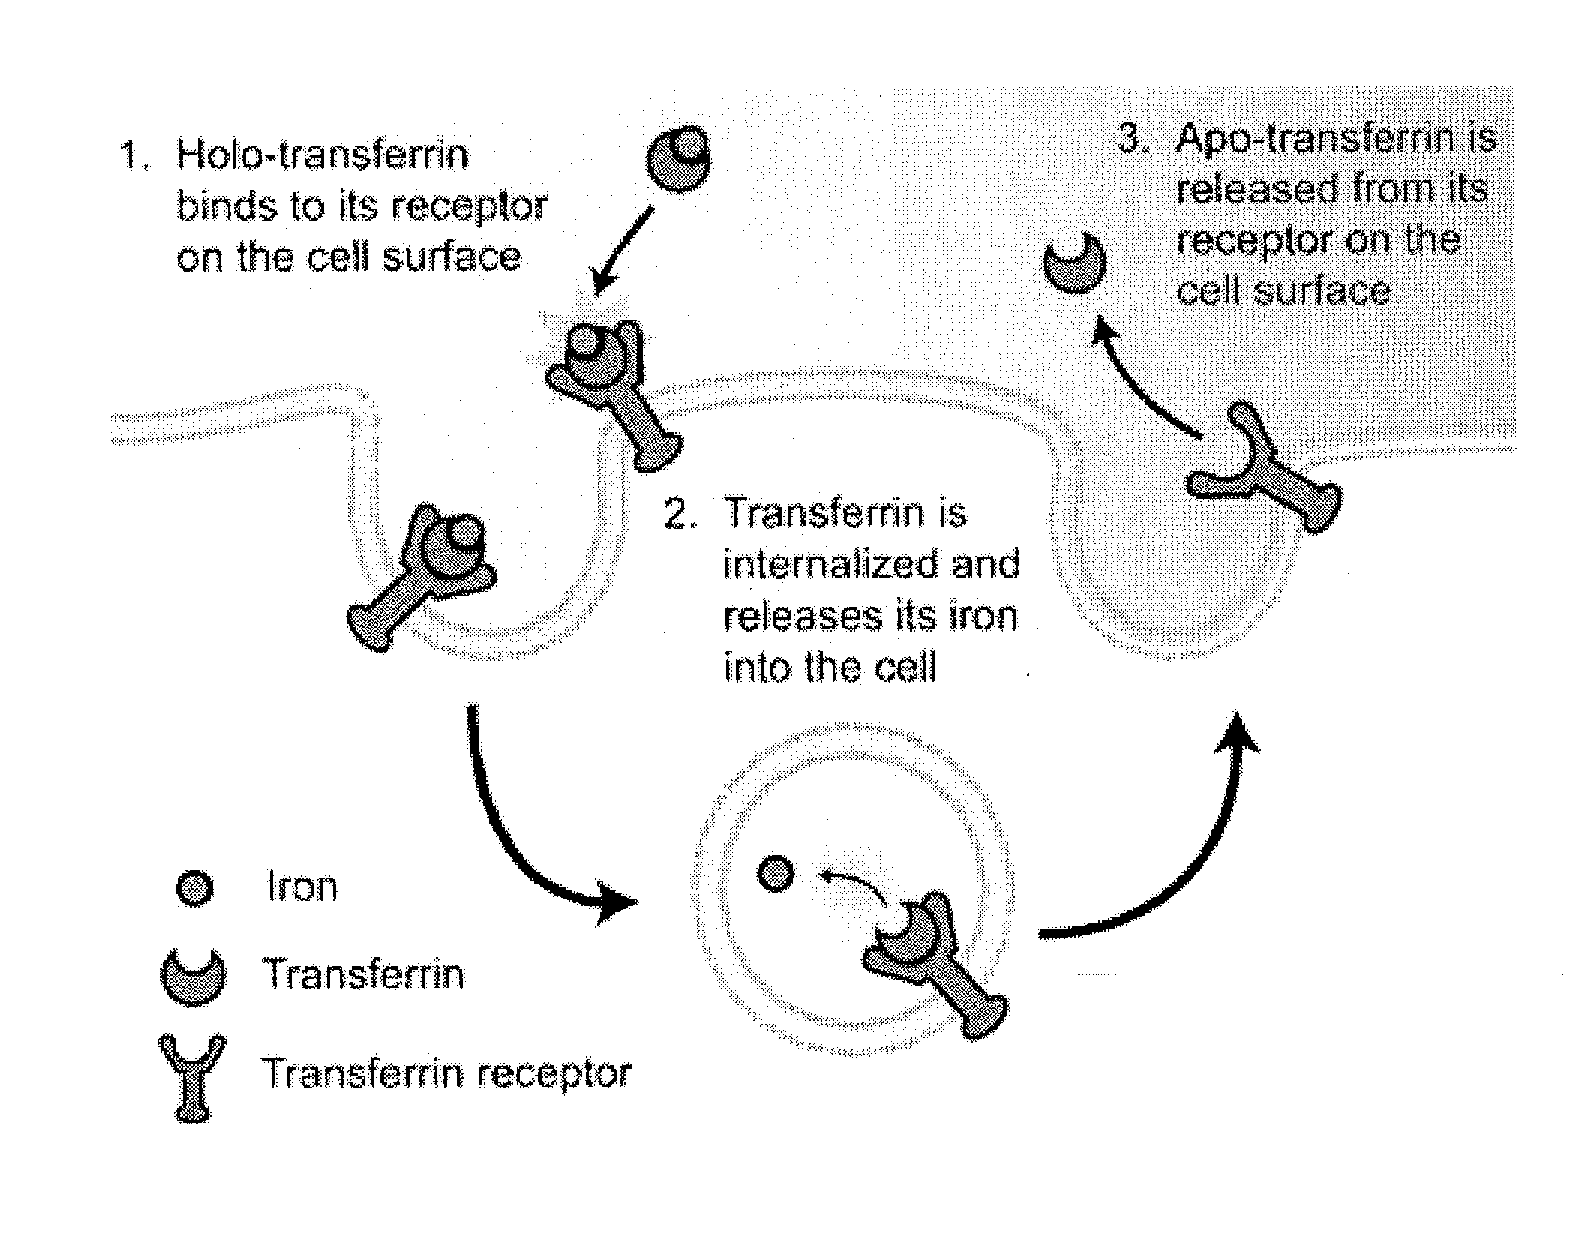 Cancer drug delivery using modified transferrin